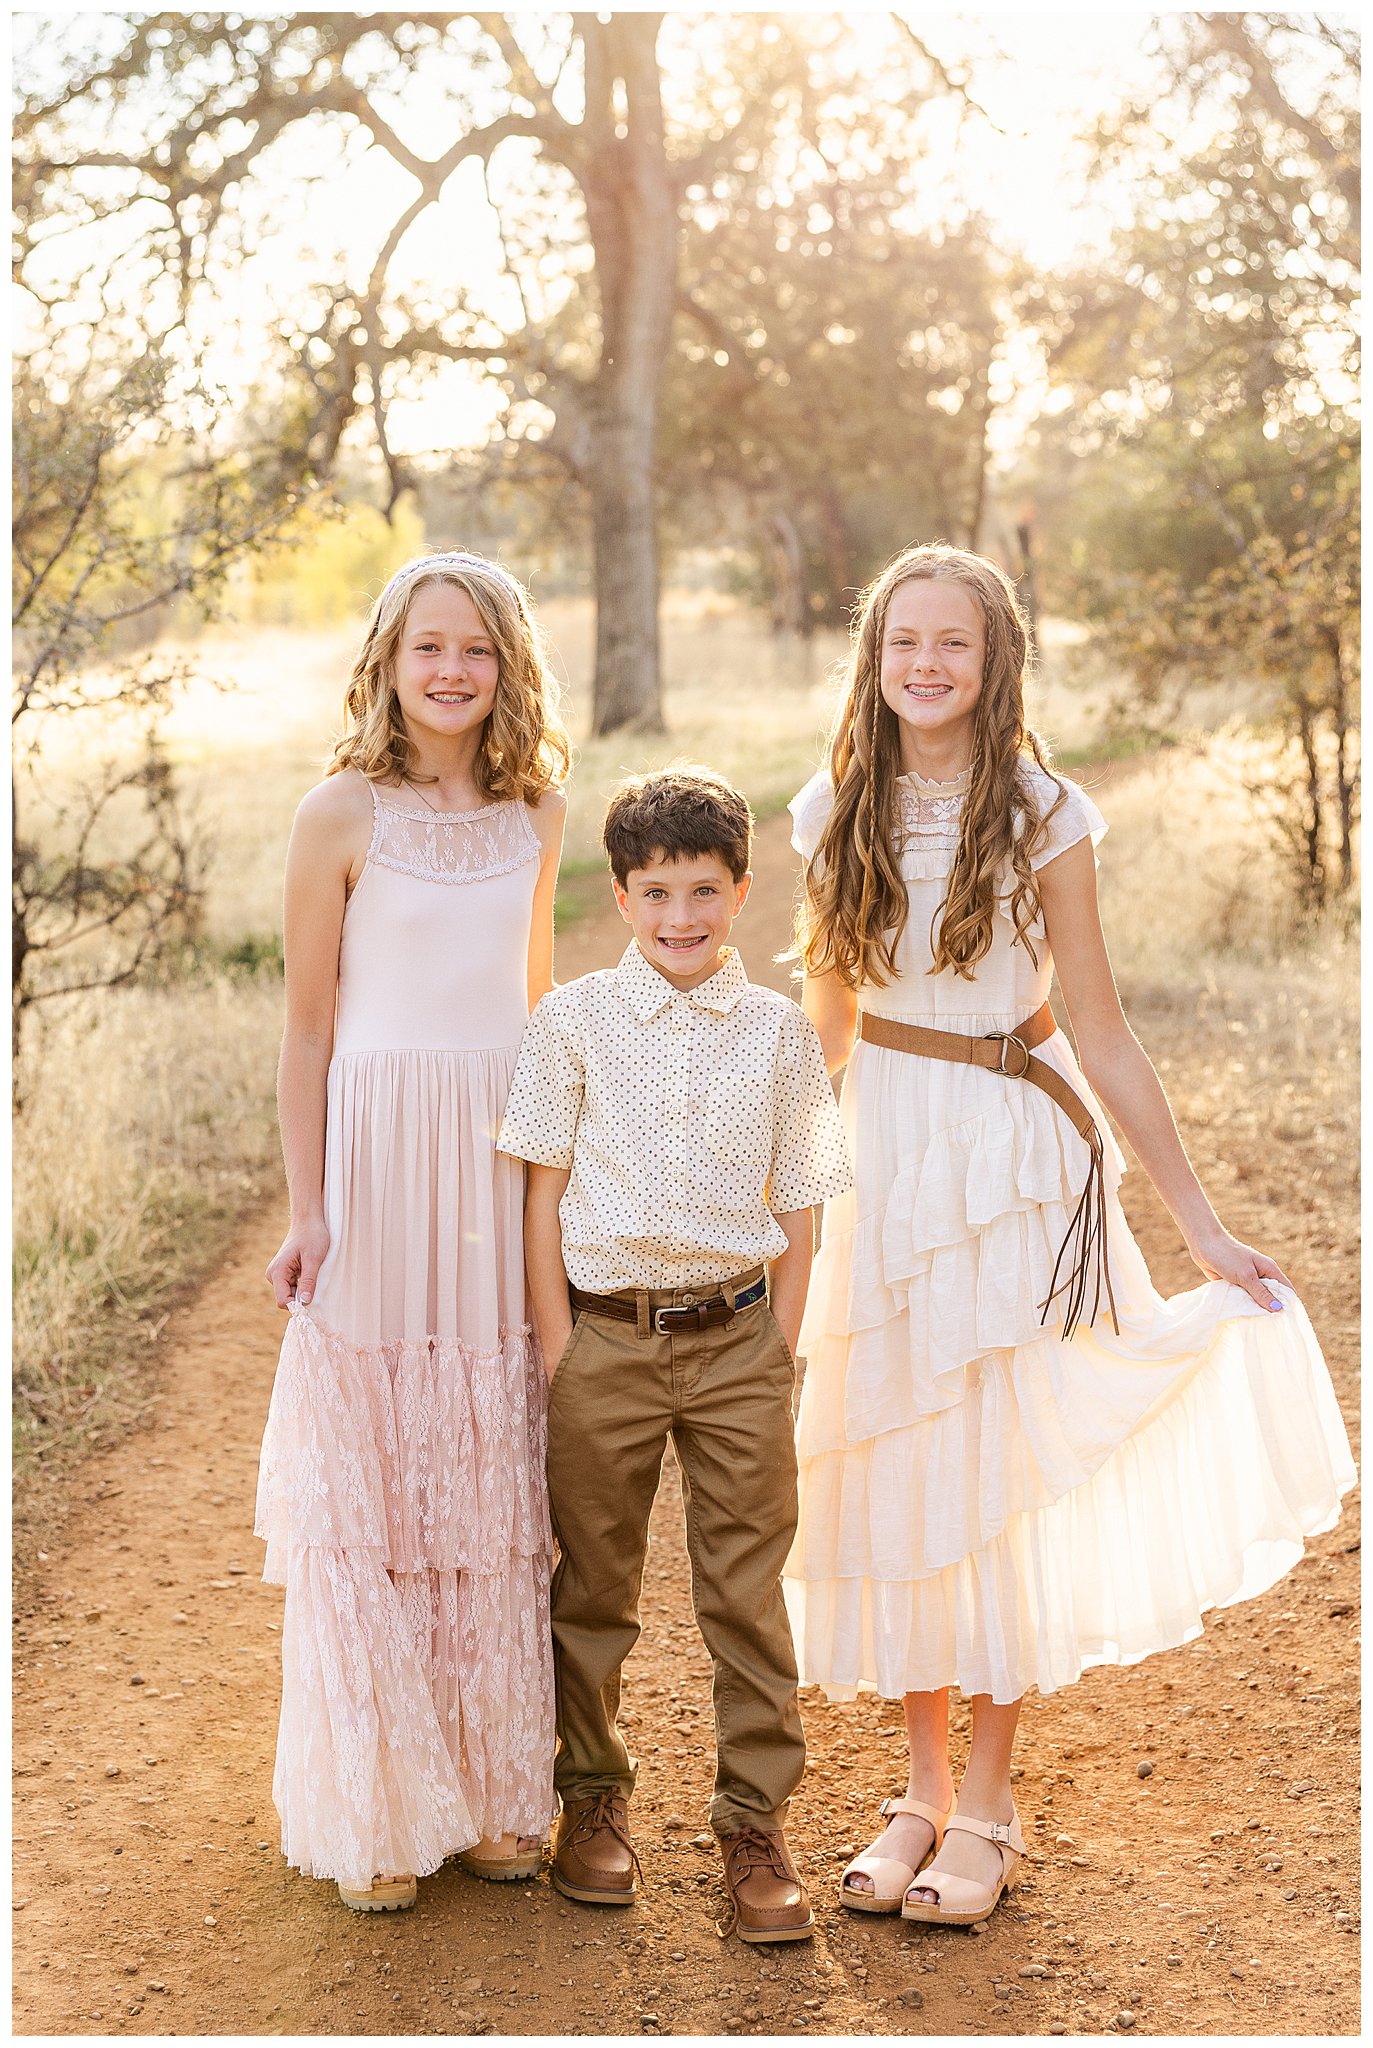 Upper Bidwell Park Family Session Chico CA Fall October Light Pastels Dresses Trail Grass,